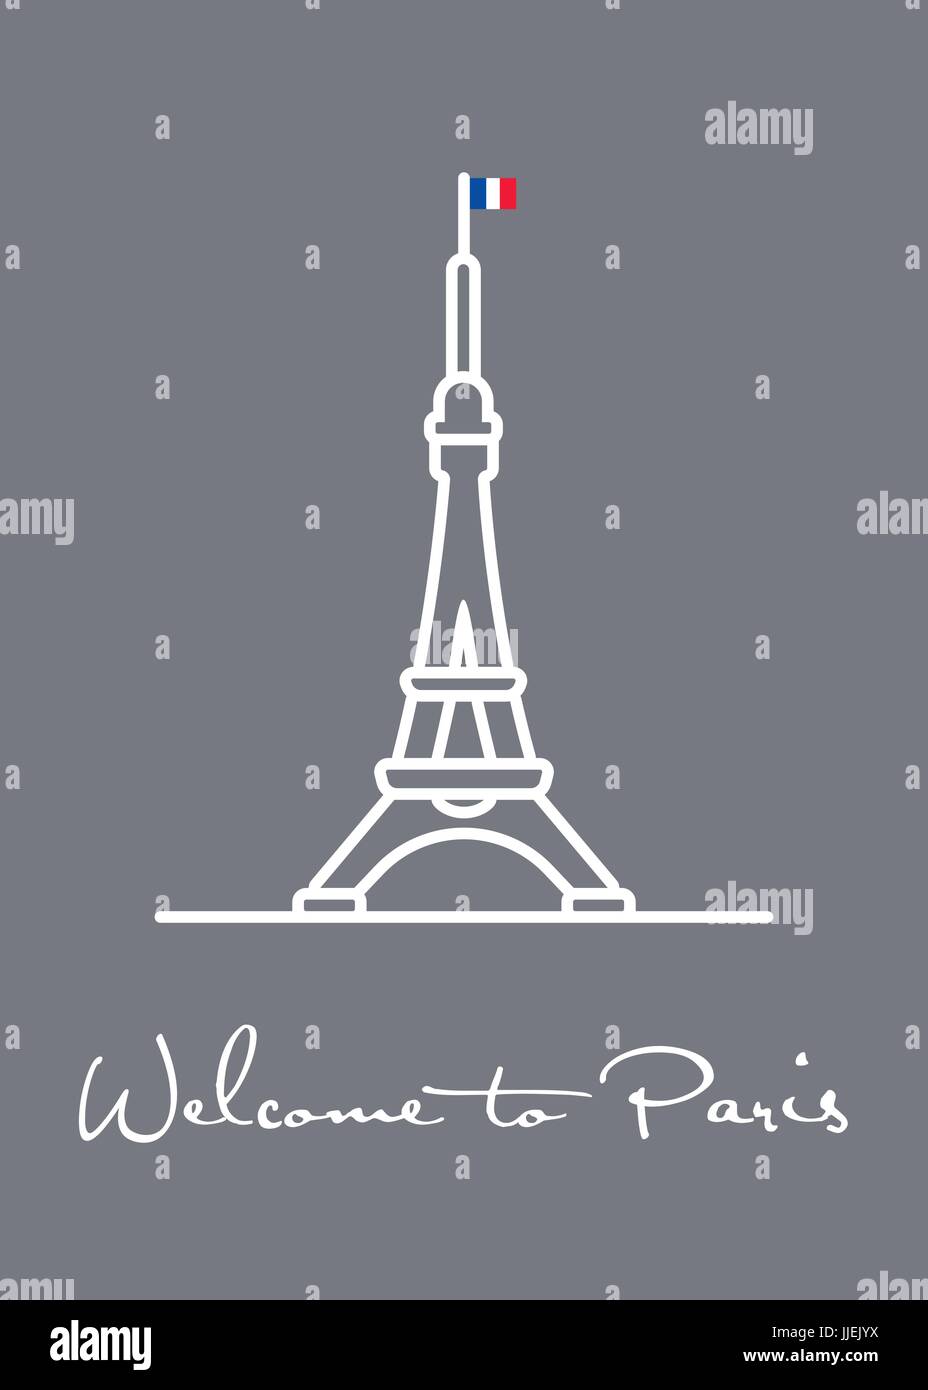 Welcome to paris, Greeting Card vector illustration with Eiffel Tower.. Stock Vector